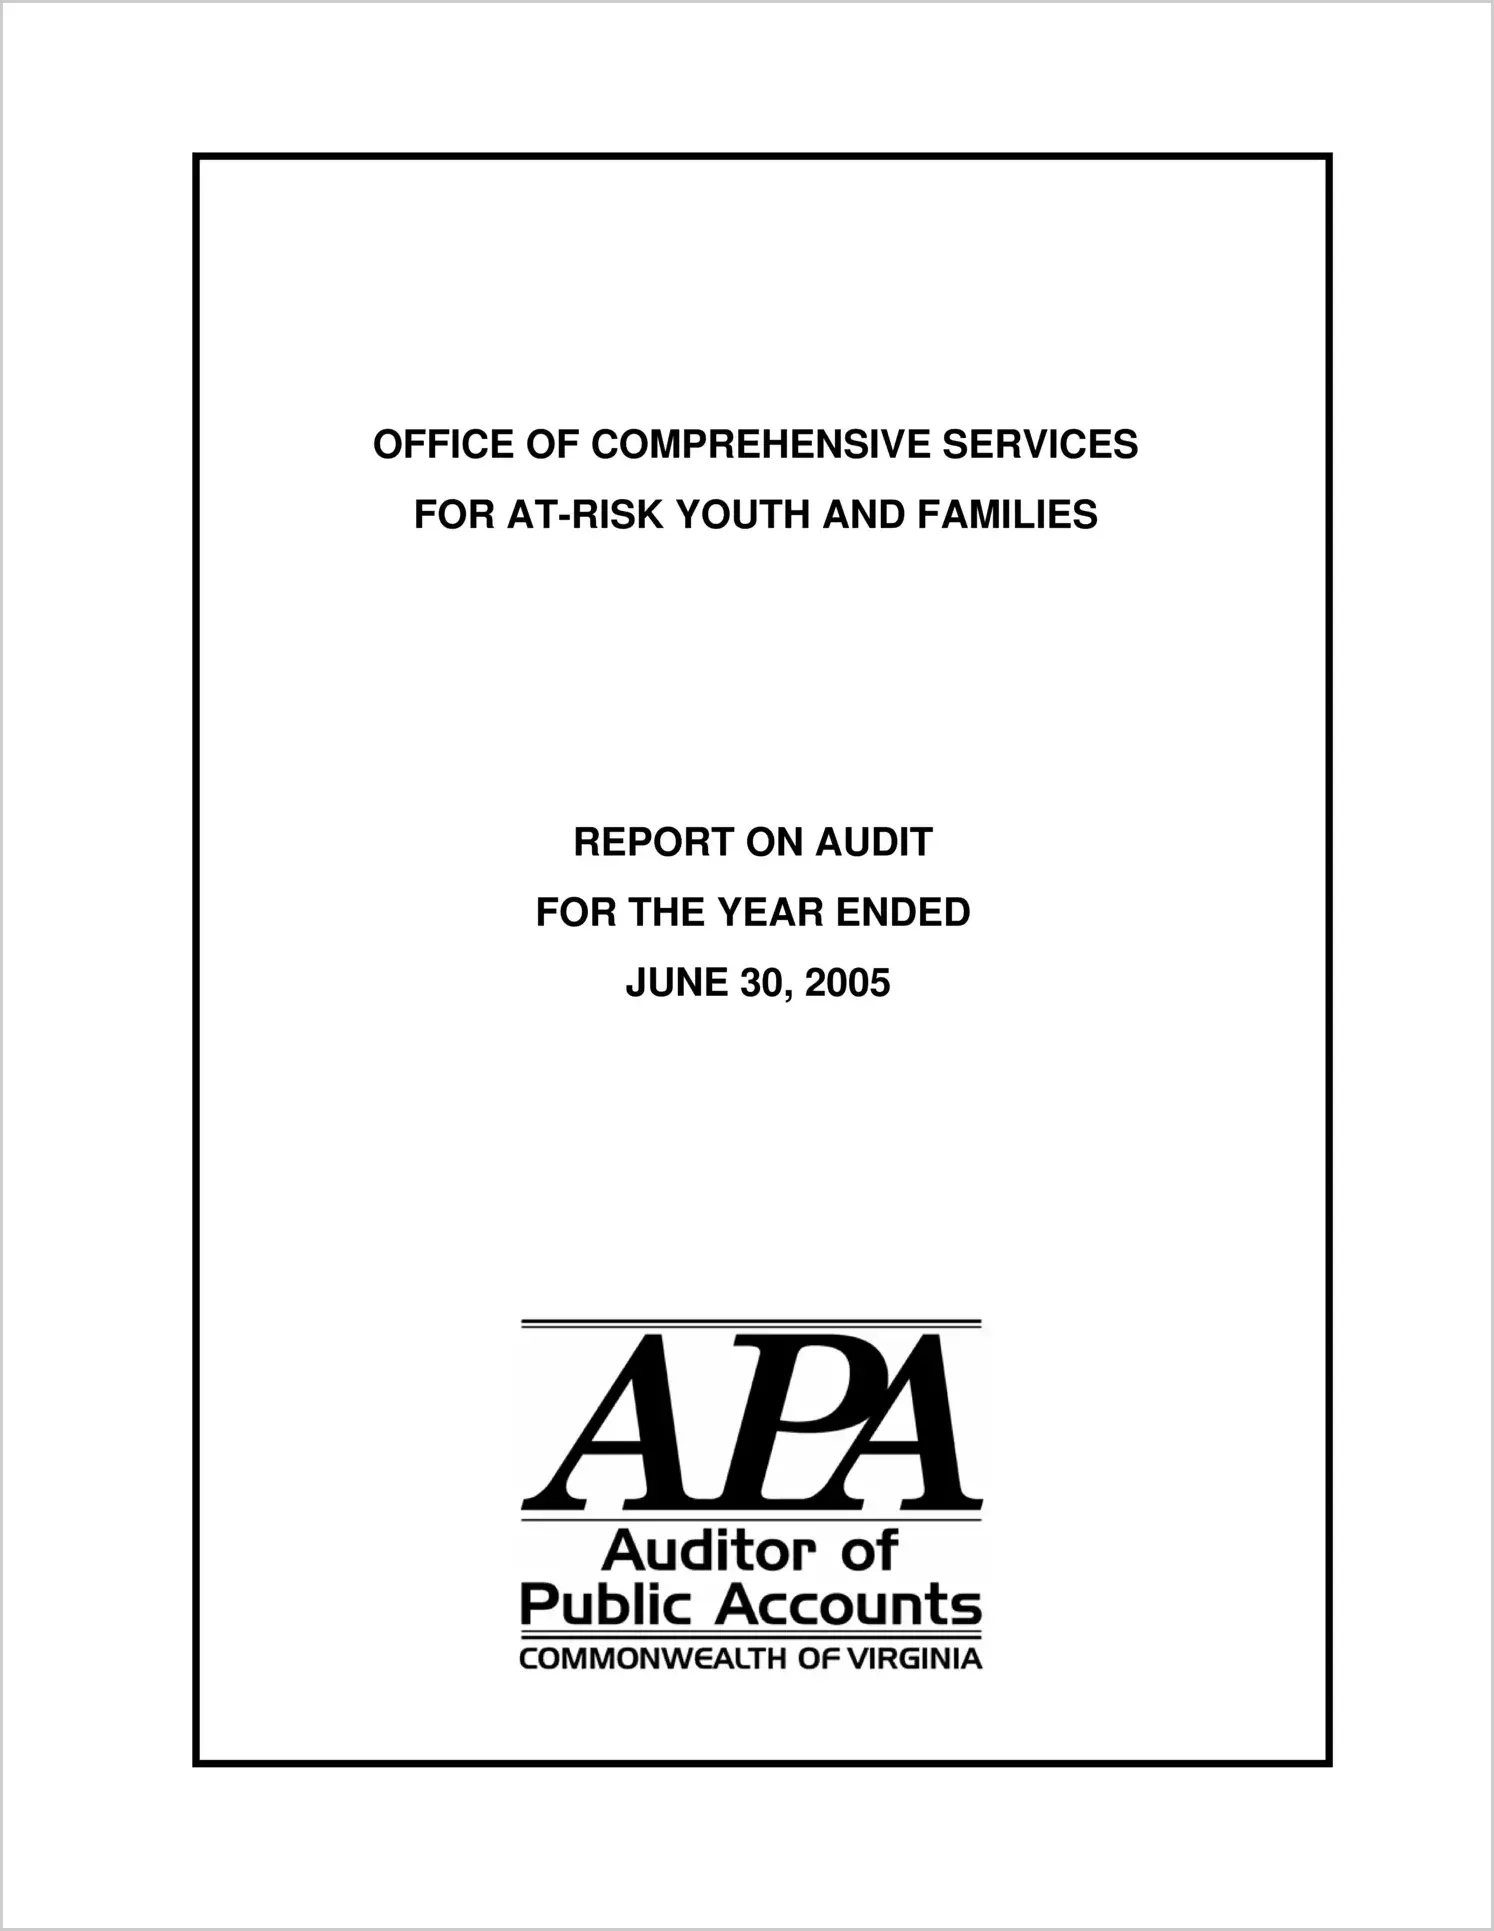 Office of Comprehensive Services for At-Risk Youth and Families for the year ended June 30, 2005